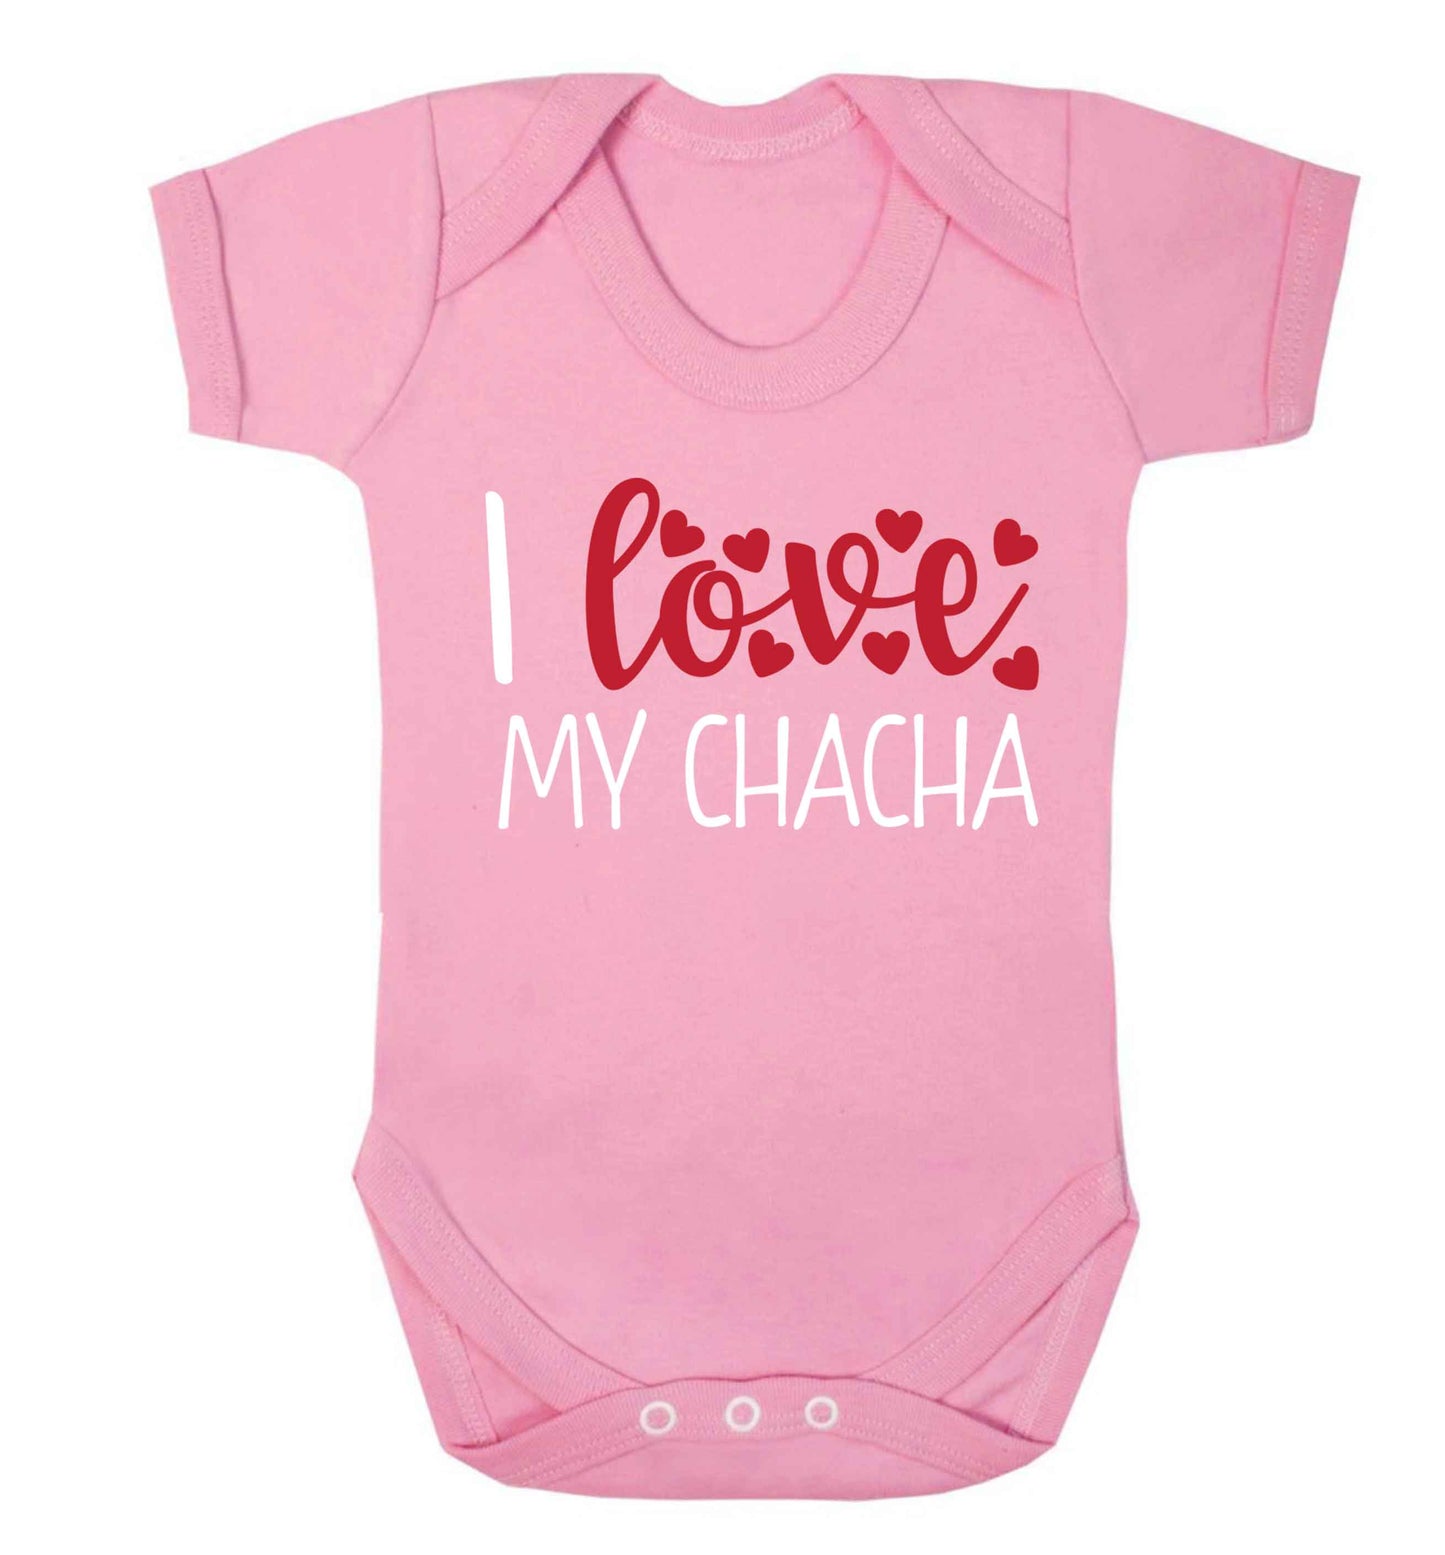 I love my chacha Baby Vest pale pink 18-24 months